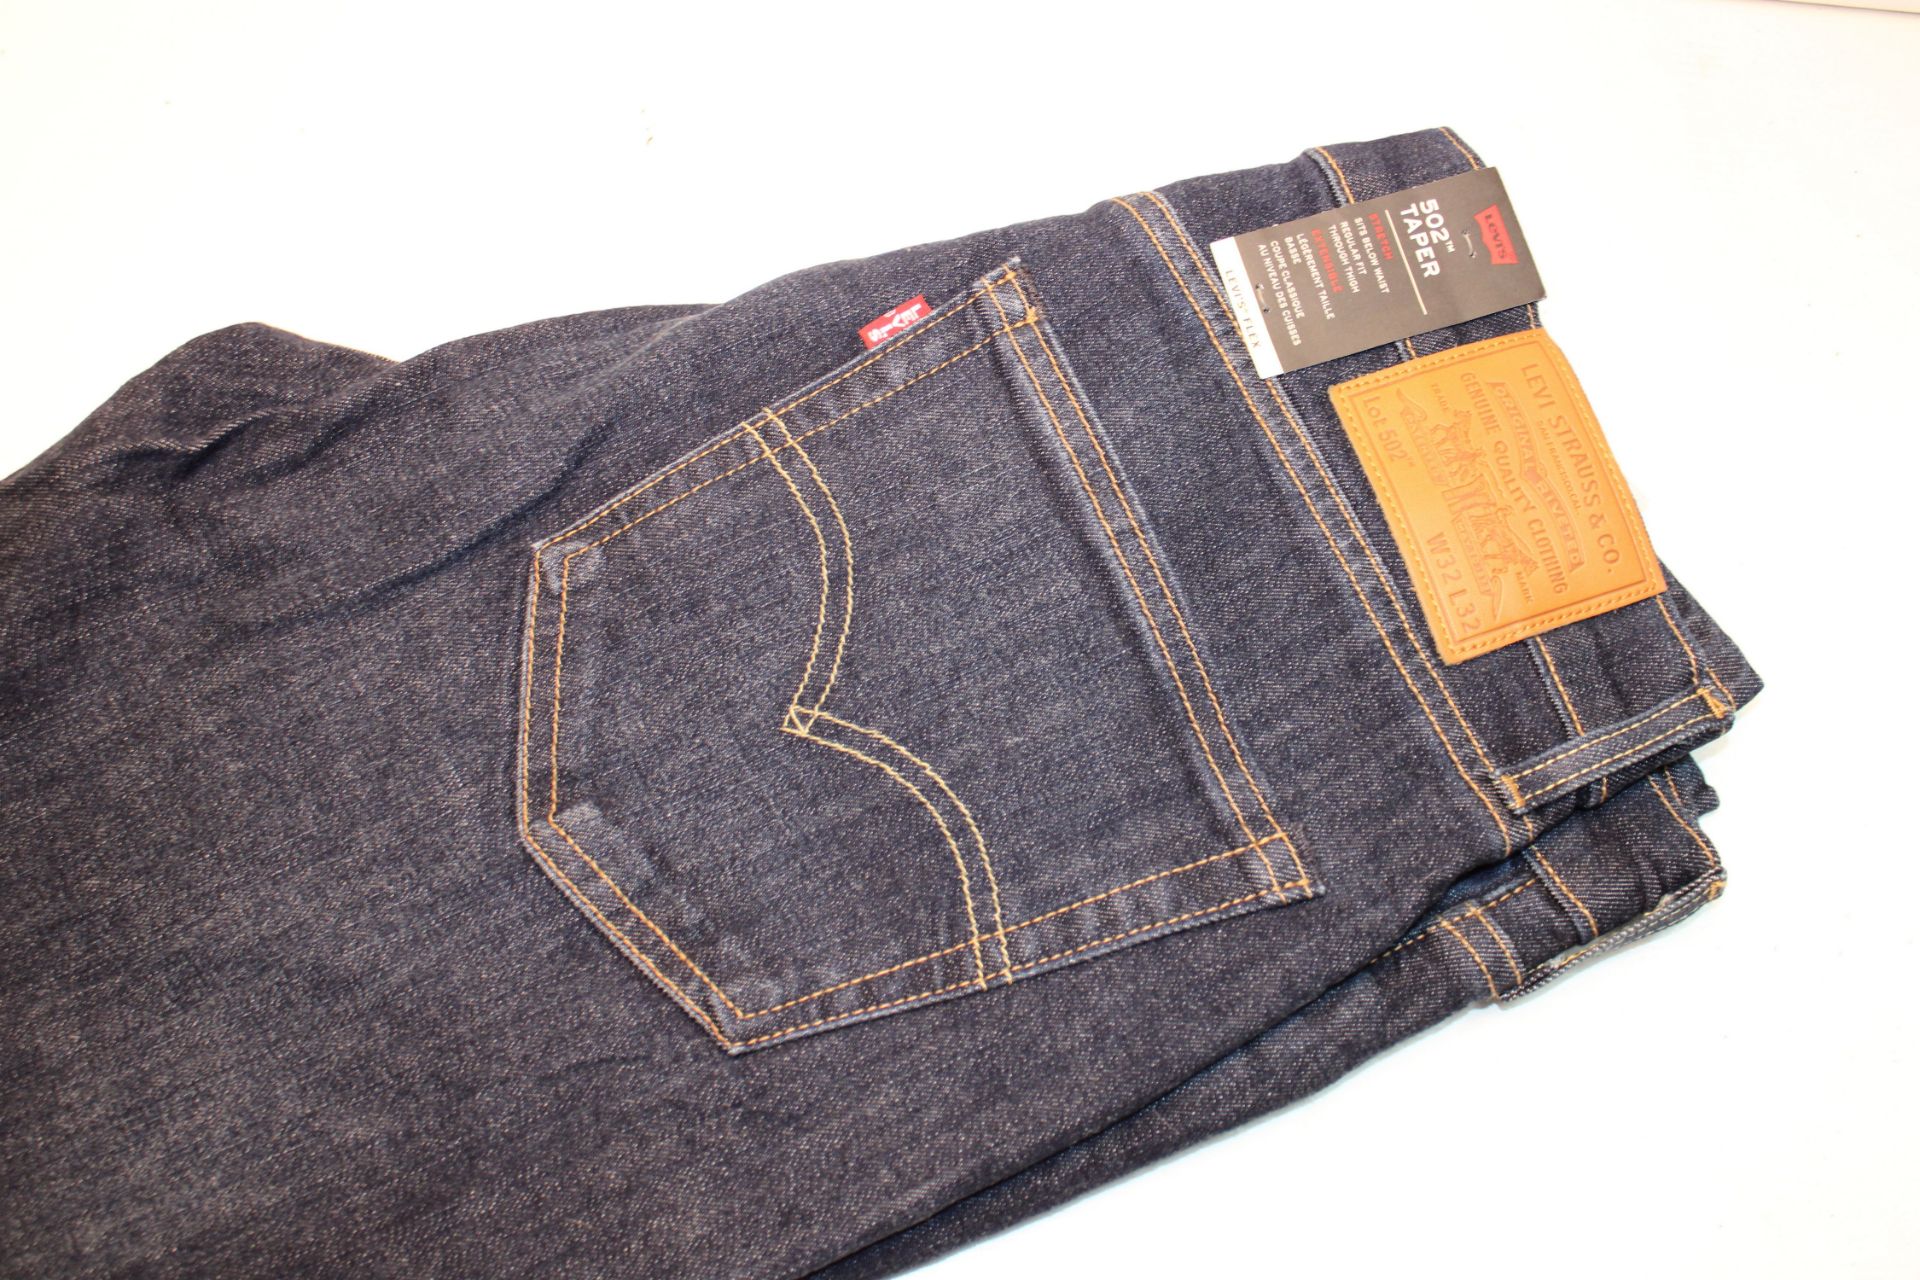 LEVIS 502 JEANS BLUE SIZE 32L RRP £59.99Condition ReportAppraisal Available on Request- All Items